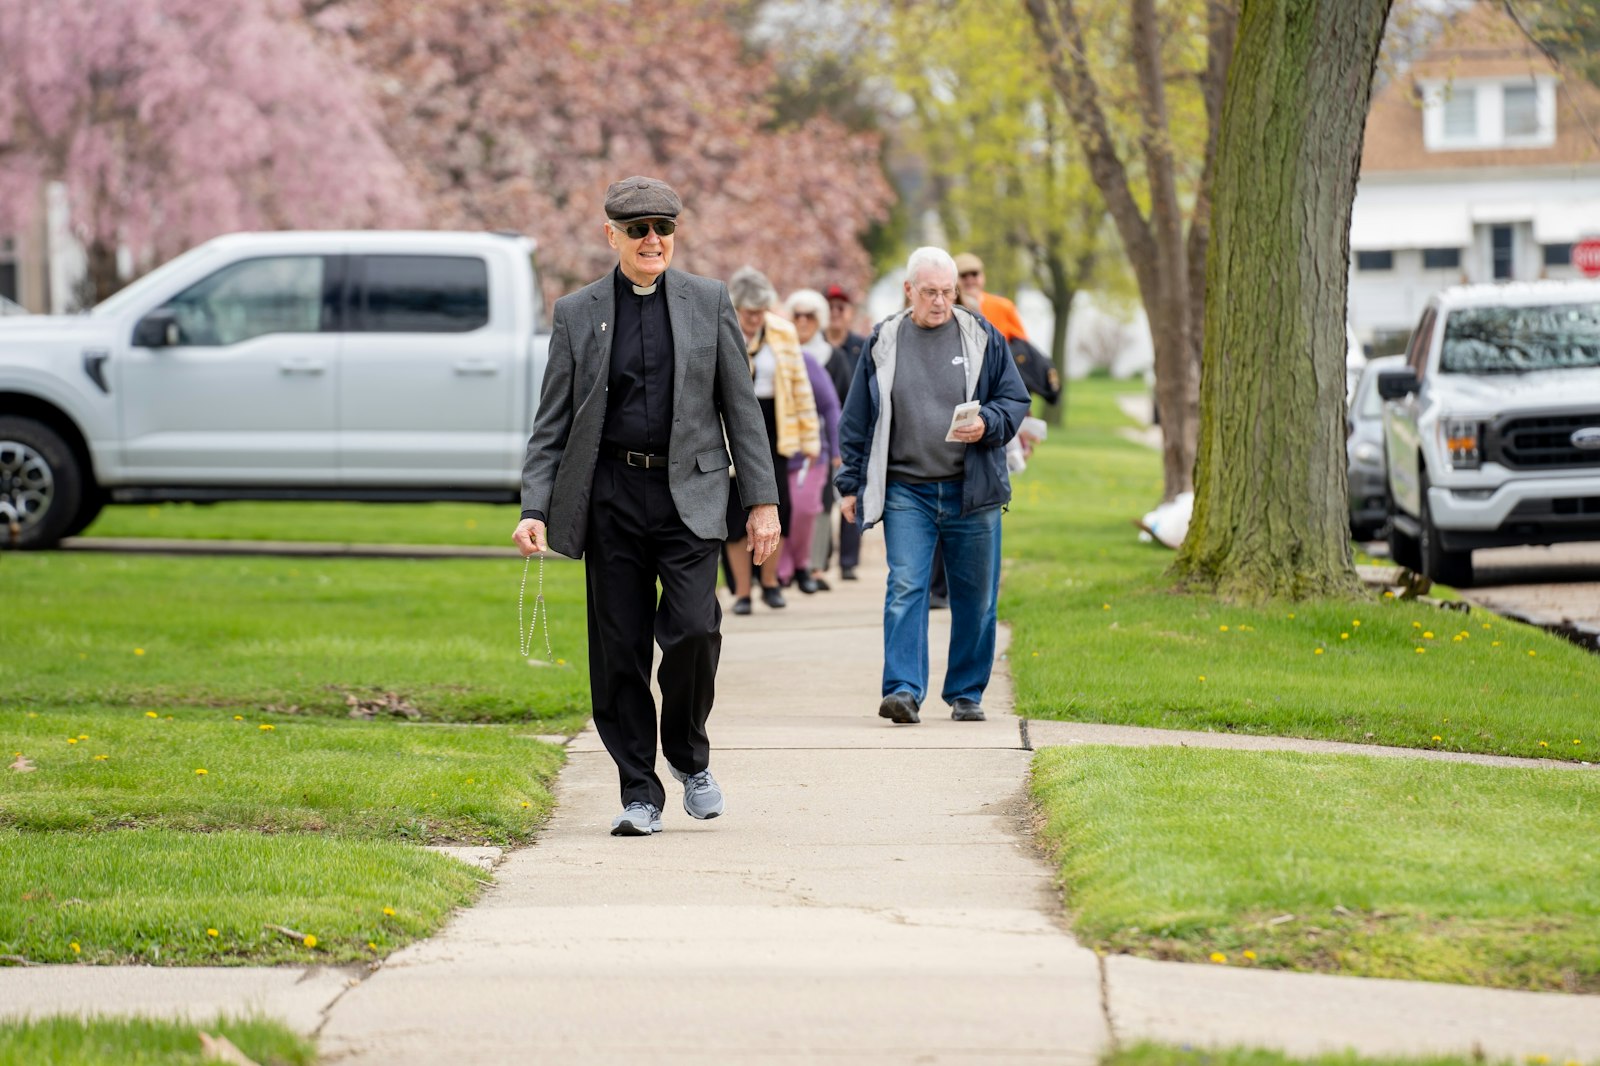 Deacon Richard Bloomfield leads parishioners on stroll along a sidewalk in a Wyandotte neighborhood May 1. "Rosary walks" have been part of the parish community since 2002, when the "rosary boxes" were installed.